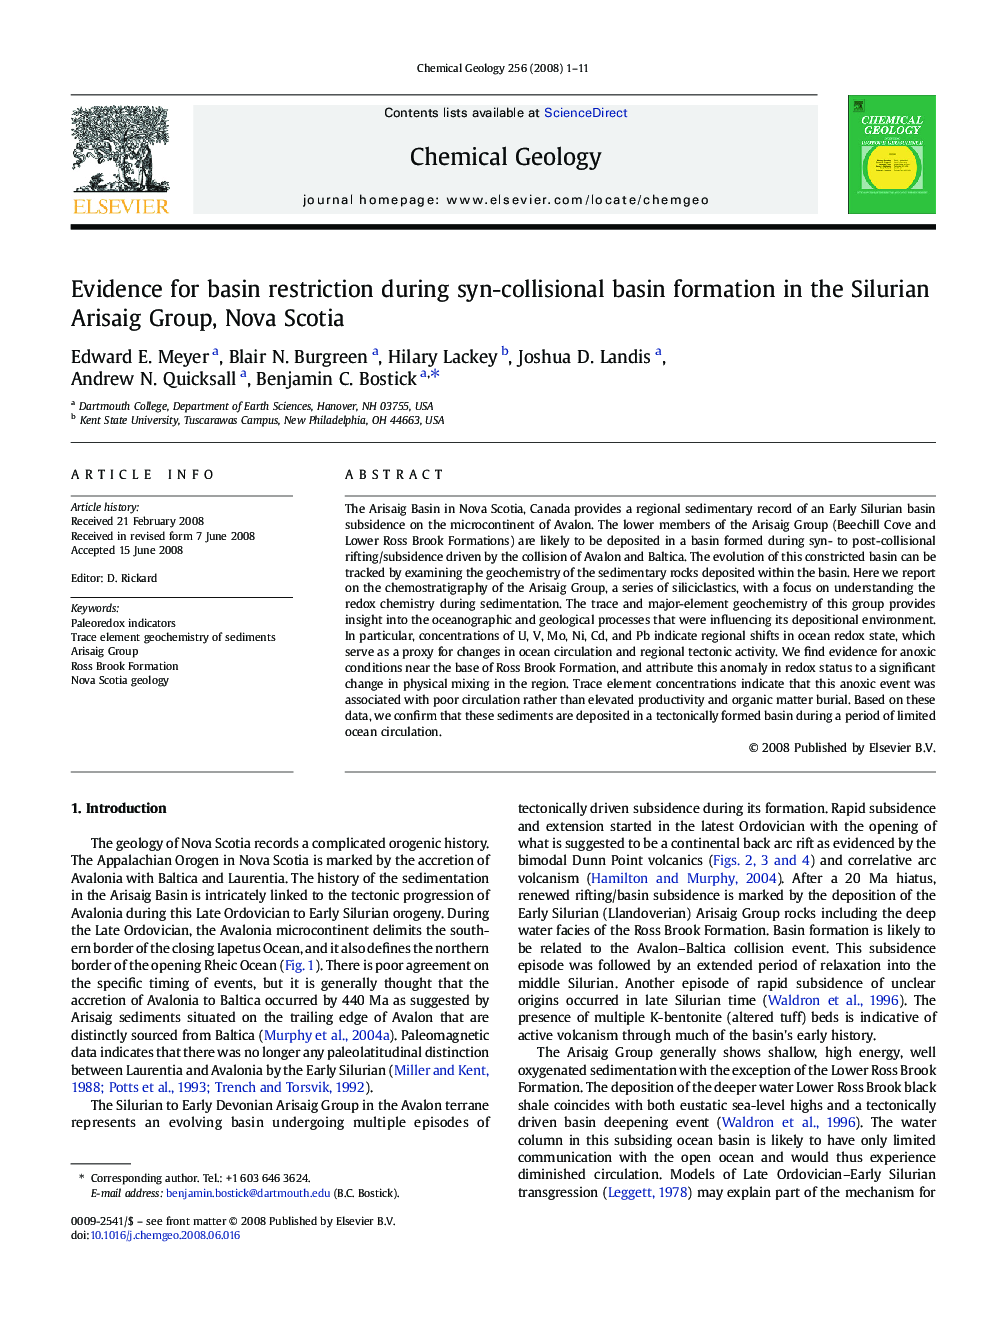 Evidence for basin restriction during syn-collisional basin formation in the Silurian Arisaig Group, Nova Scotia